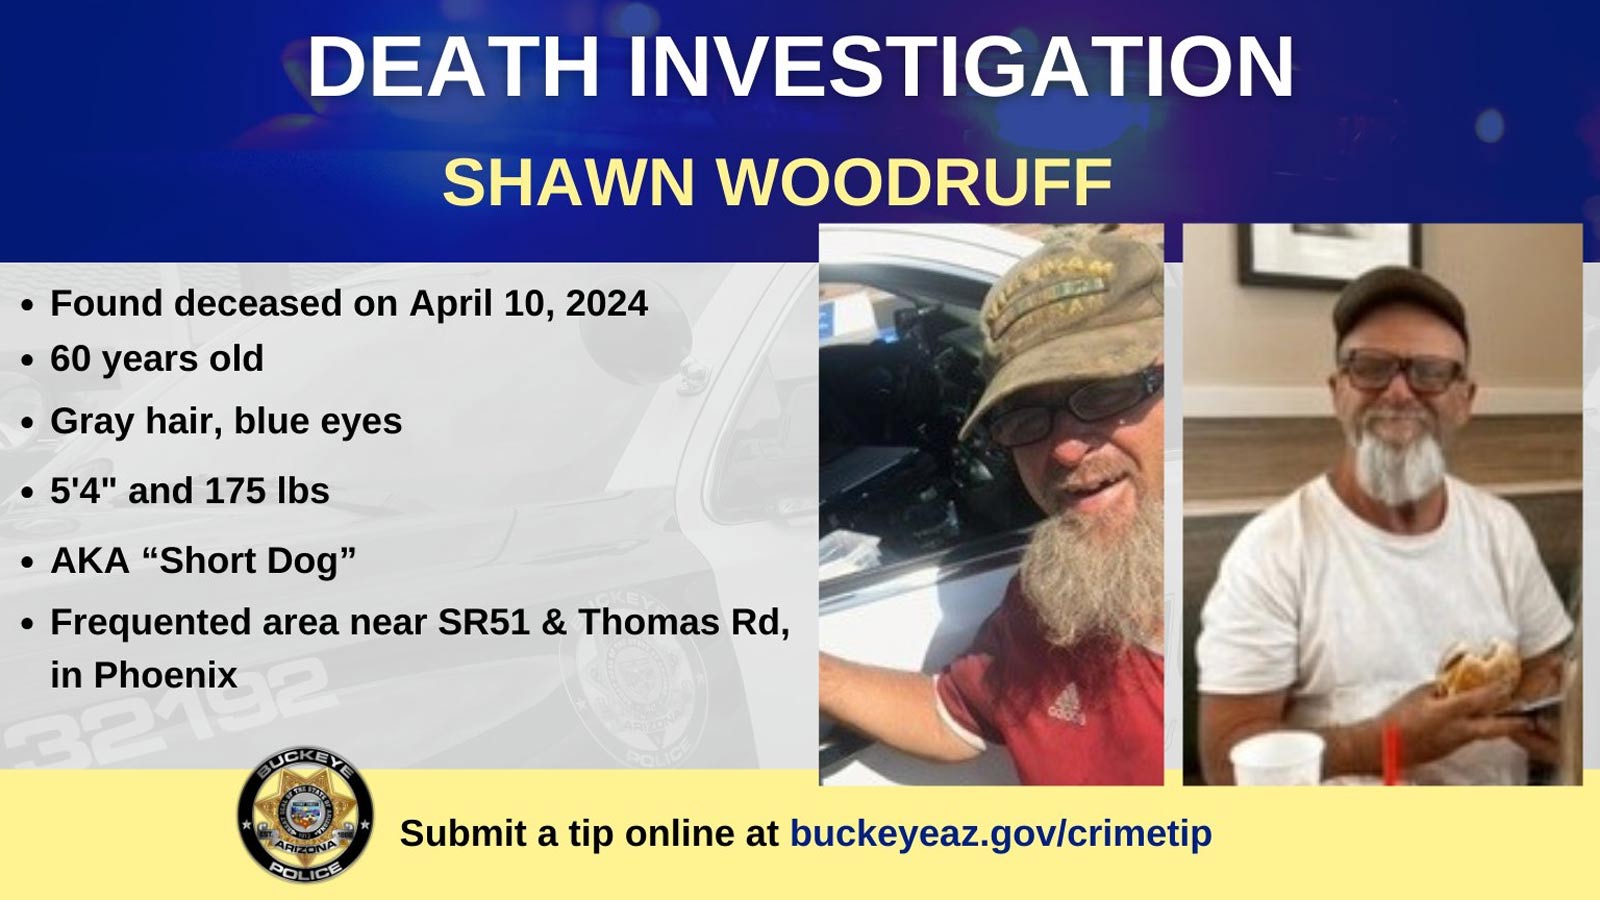 A graphic with photos and a description of Shawn Woodruff, whose body was found dead in a Buckeye l...